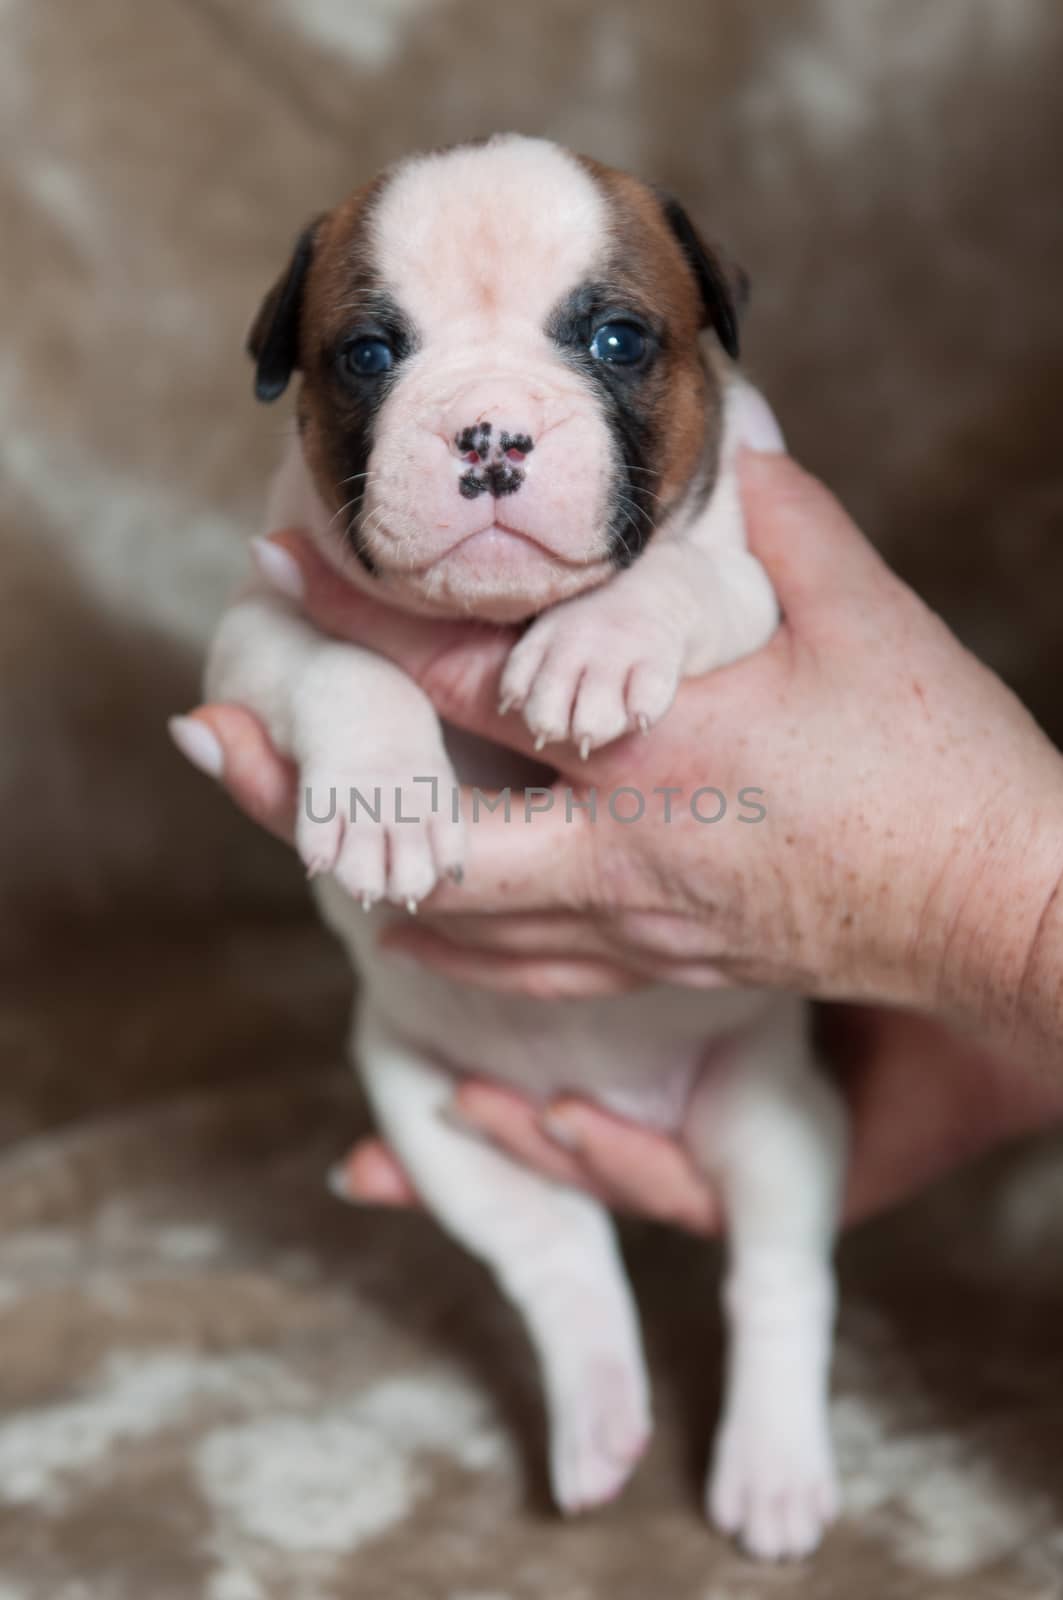 Small American Bulldog puppy on hands on light by infinityyy